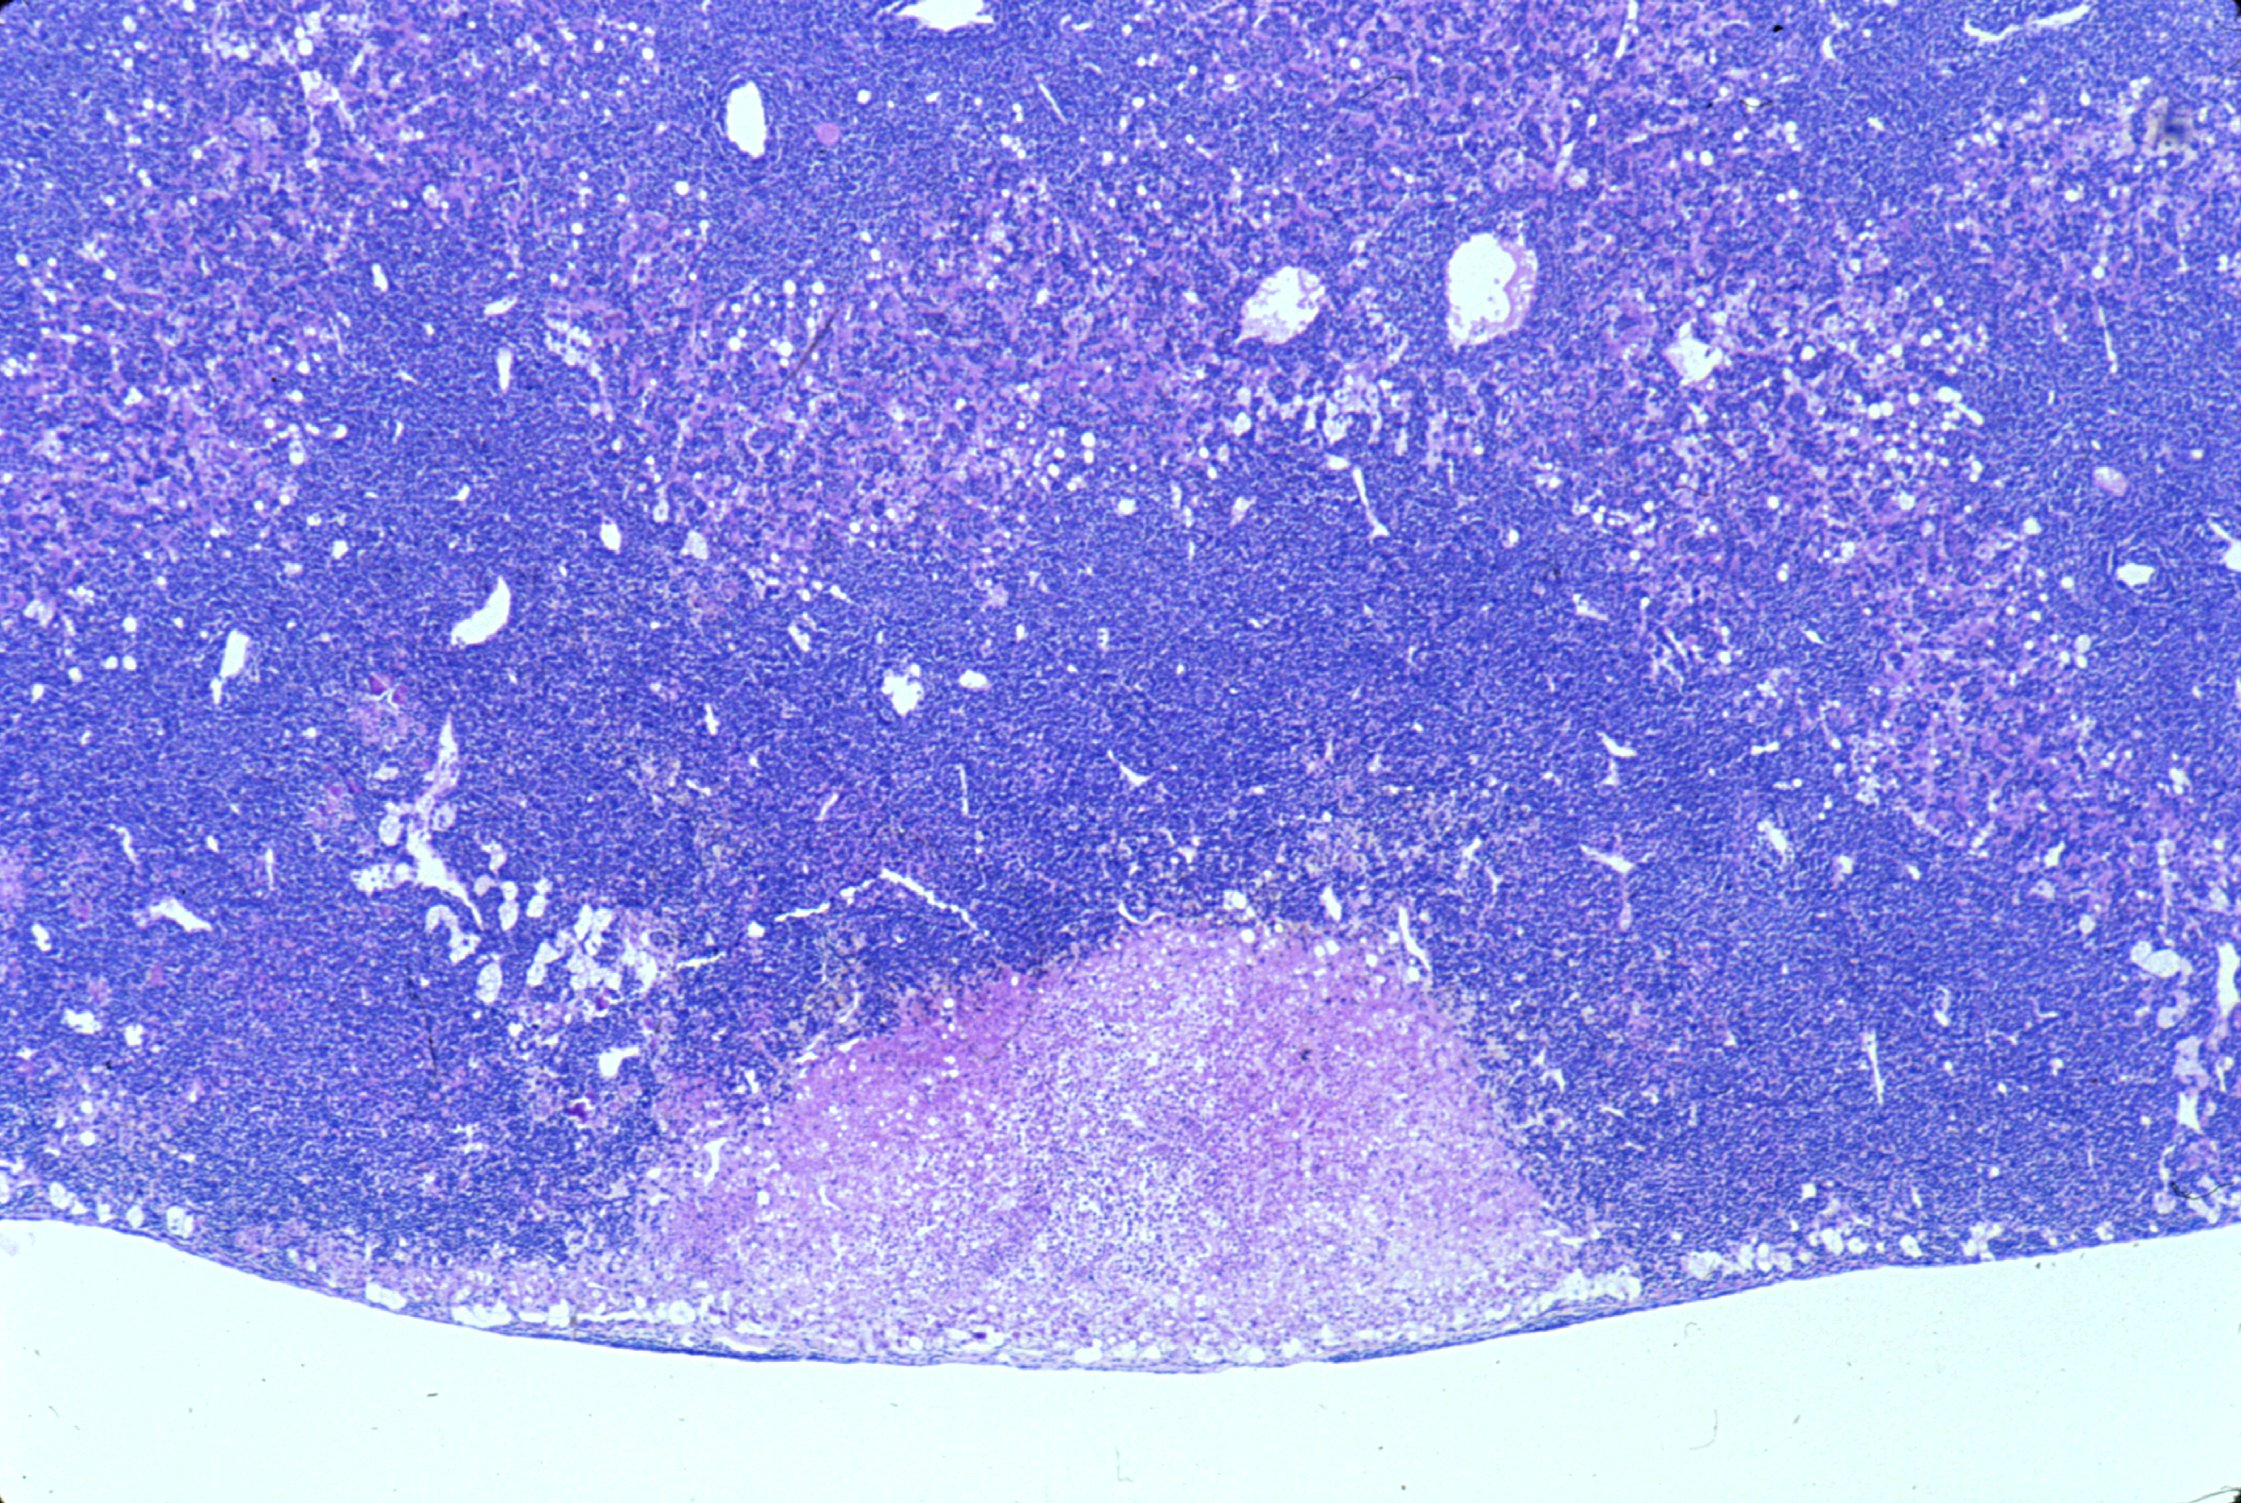 Histiocytic sarcoma in the liver with accompanying necrosis.